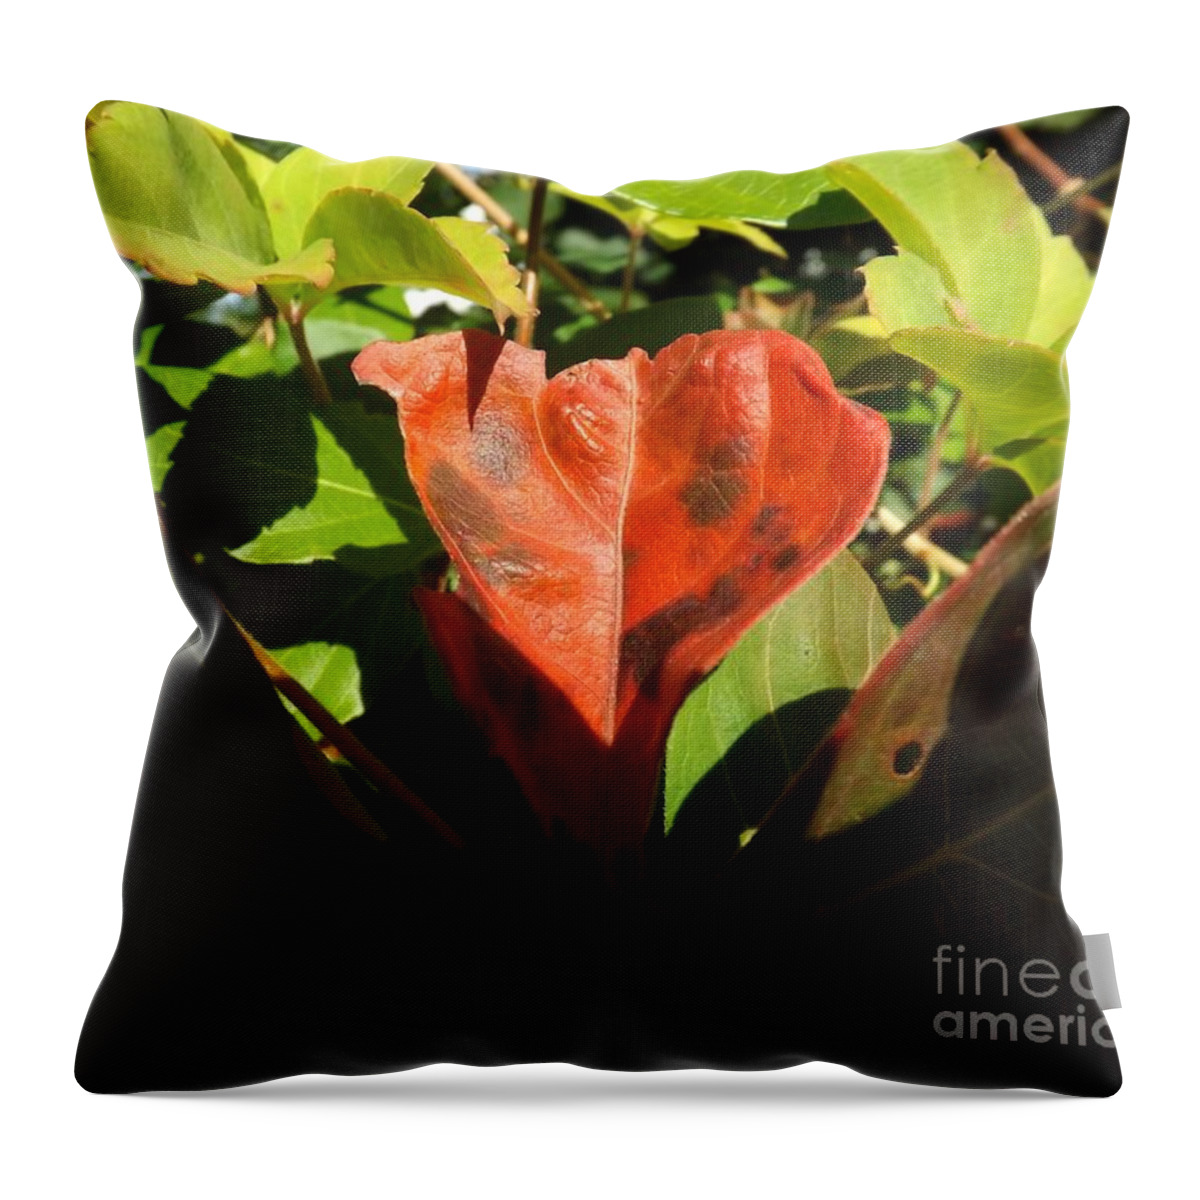 Autumn Throw Pillow featuring the photograph Autumn Colors by Robyn King